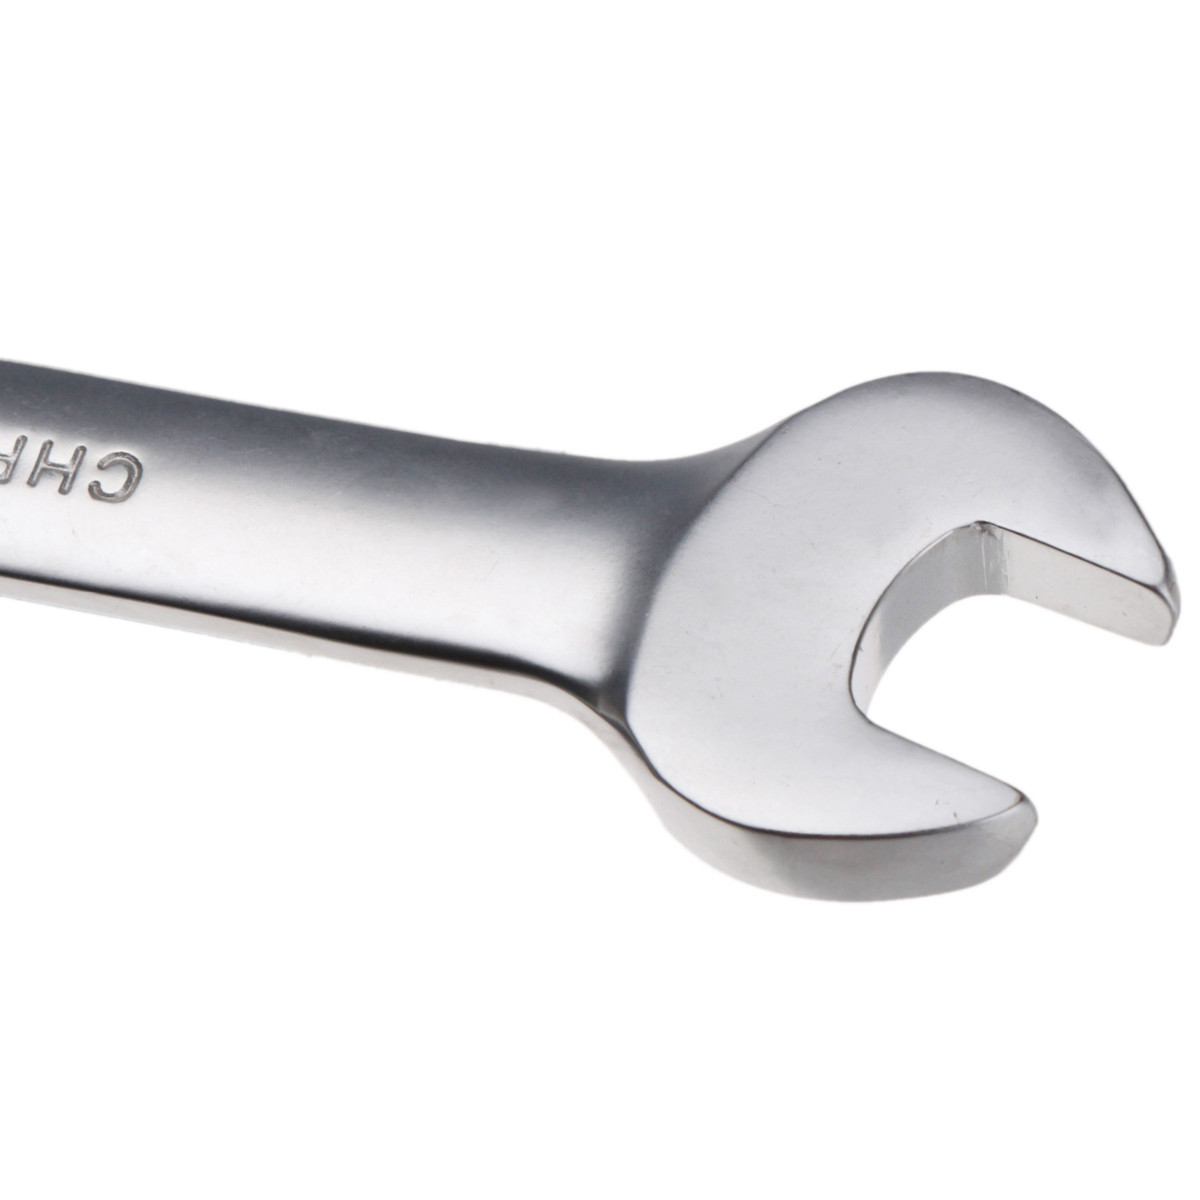 13-mm-Flexible-Head-Wrench-Ratchet-Metric-Spanner-Open-End-and-Ring-Wrenches-Tool-979824